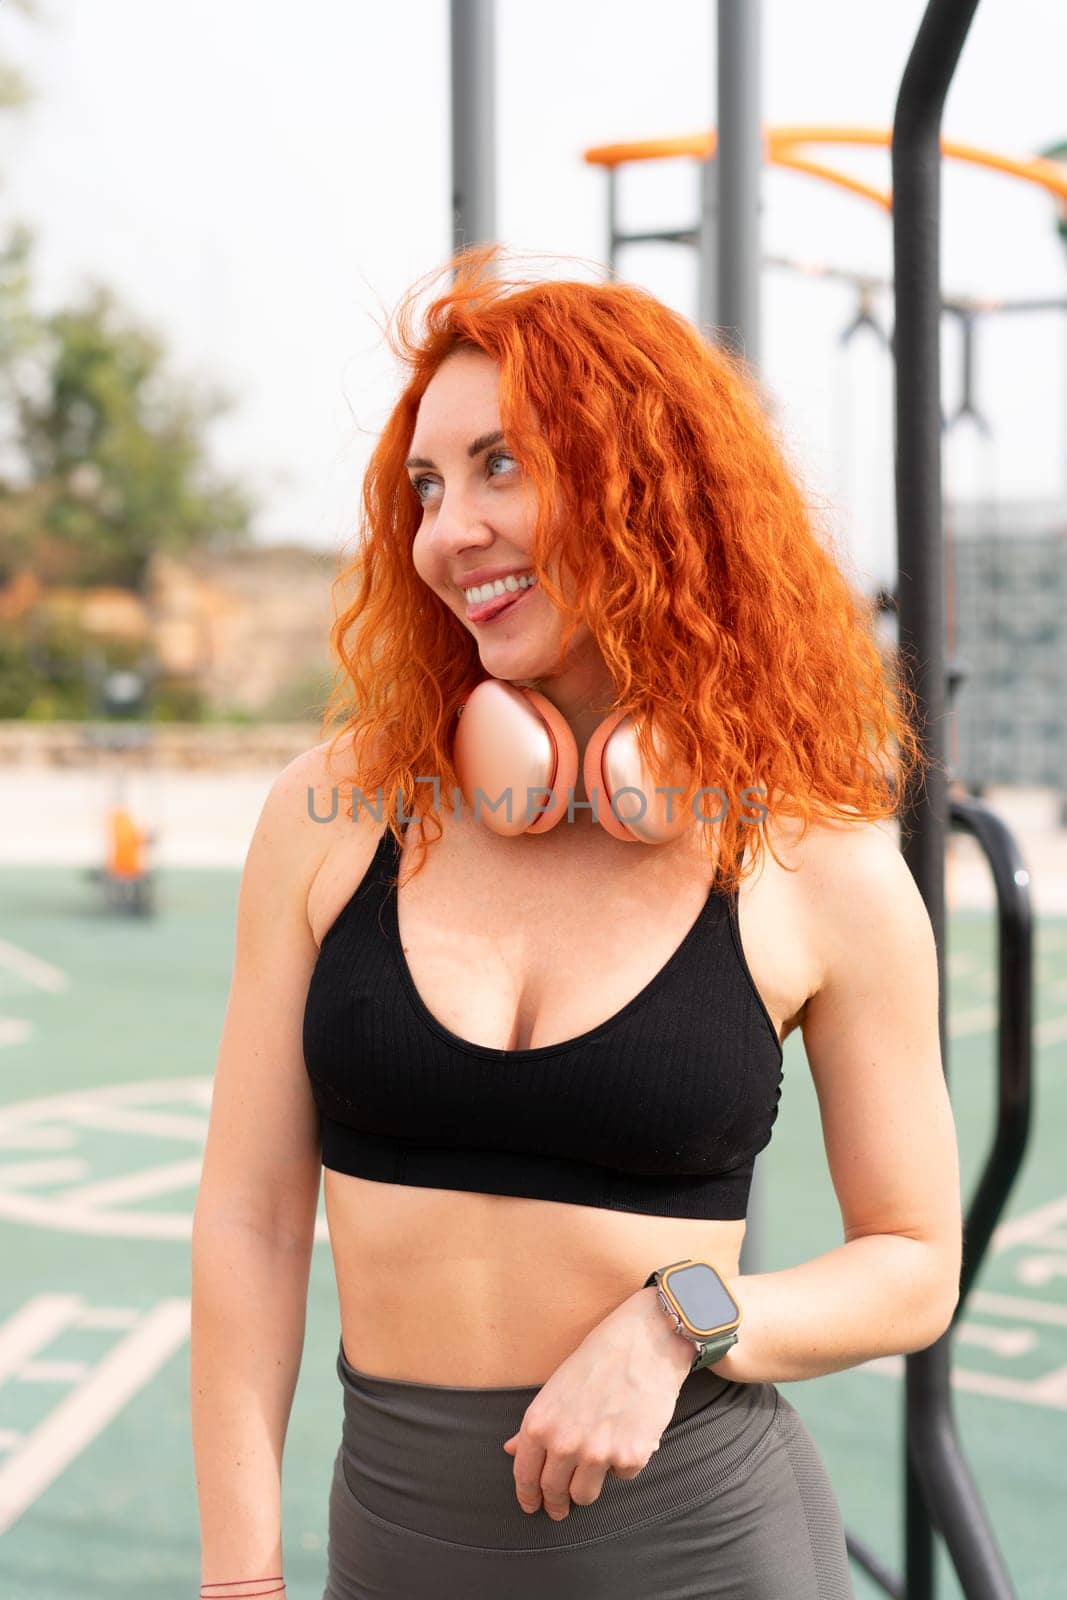 Funny sportswoman biting tongue and looking away. Smiling fit woman athlete with red hair in sportswear standing on outdoor gym park on sunny day.